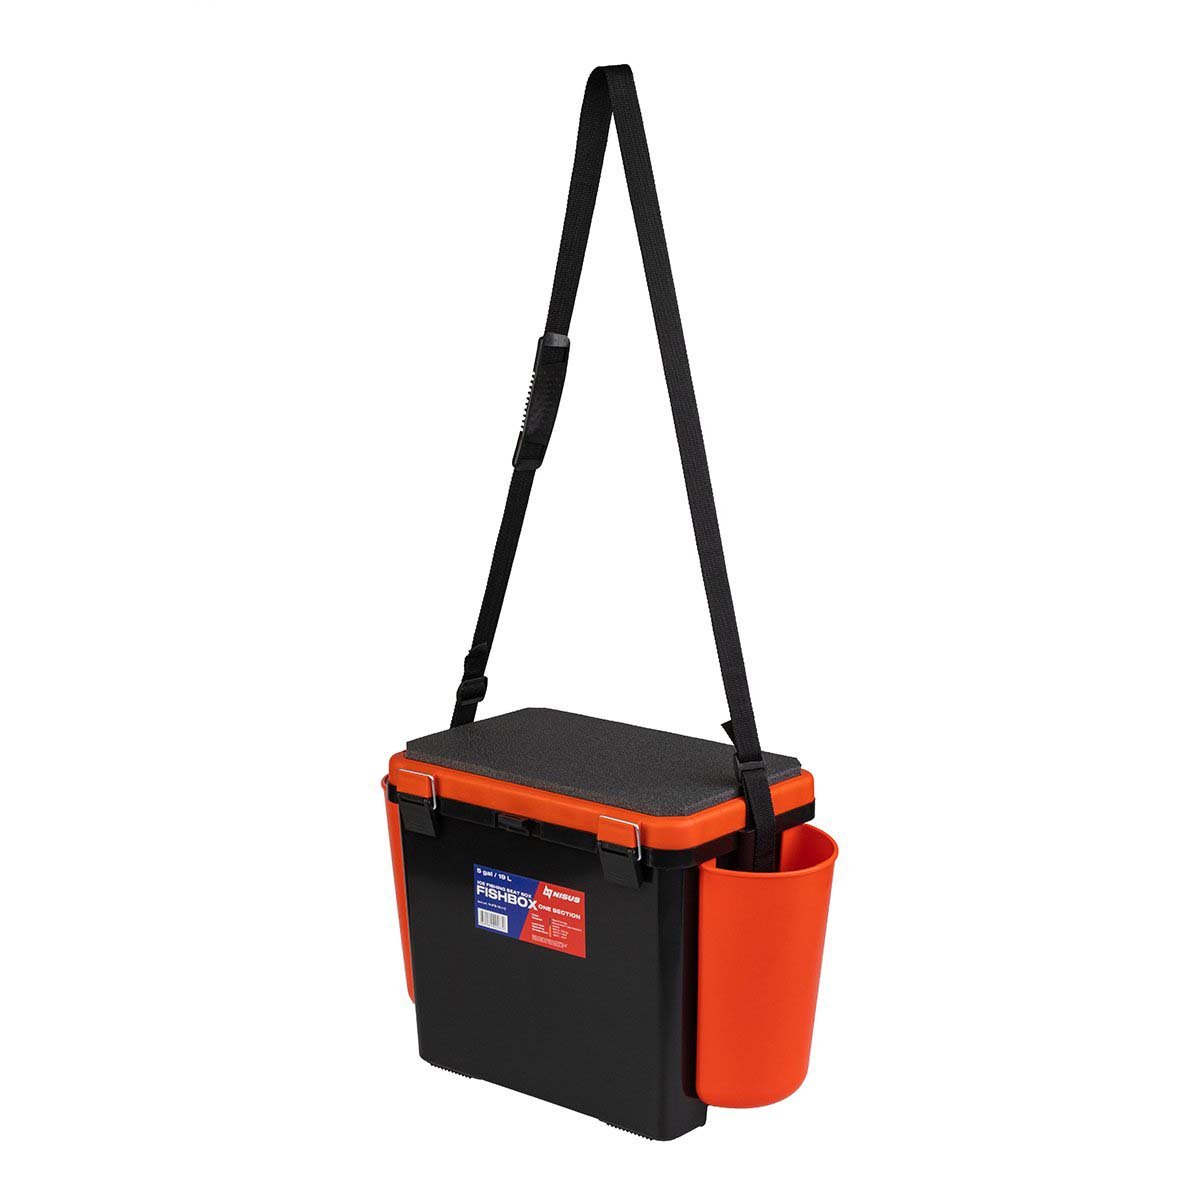 FishBox Large 5 gal SeatBox for Ice Fishing Tackle and Gear with adjustable shoulder strap, orange